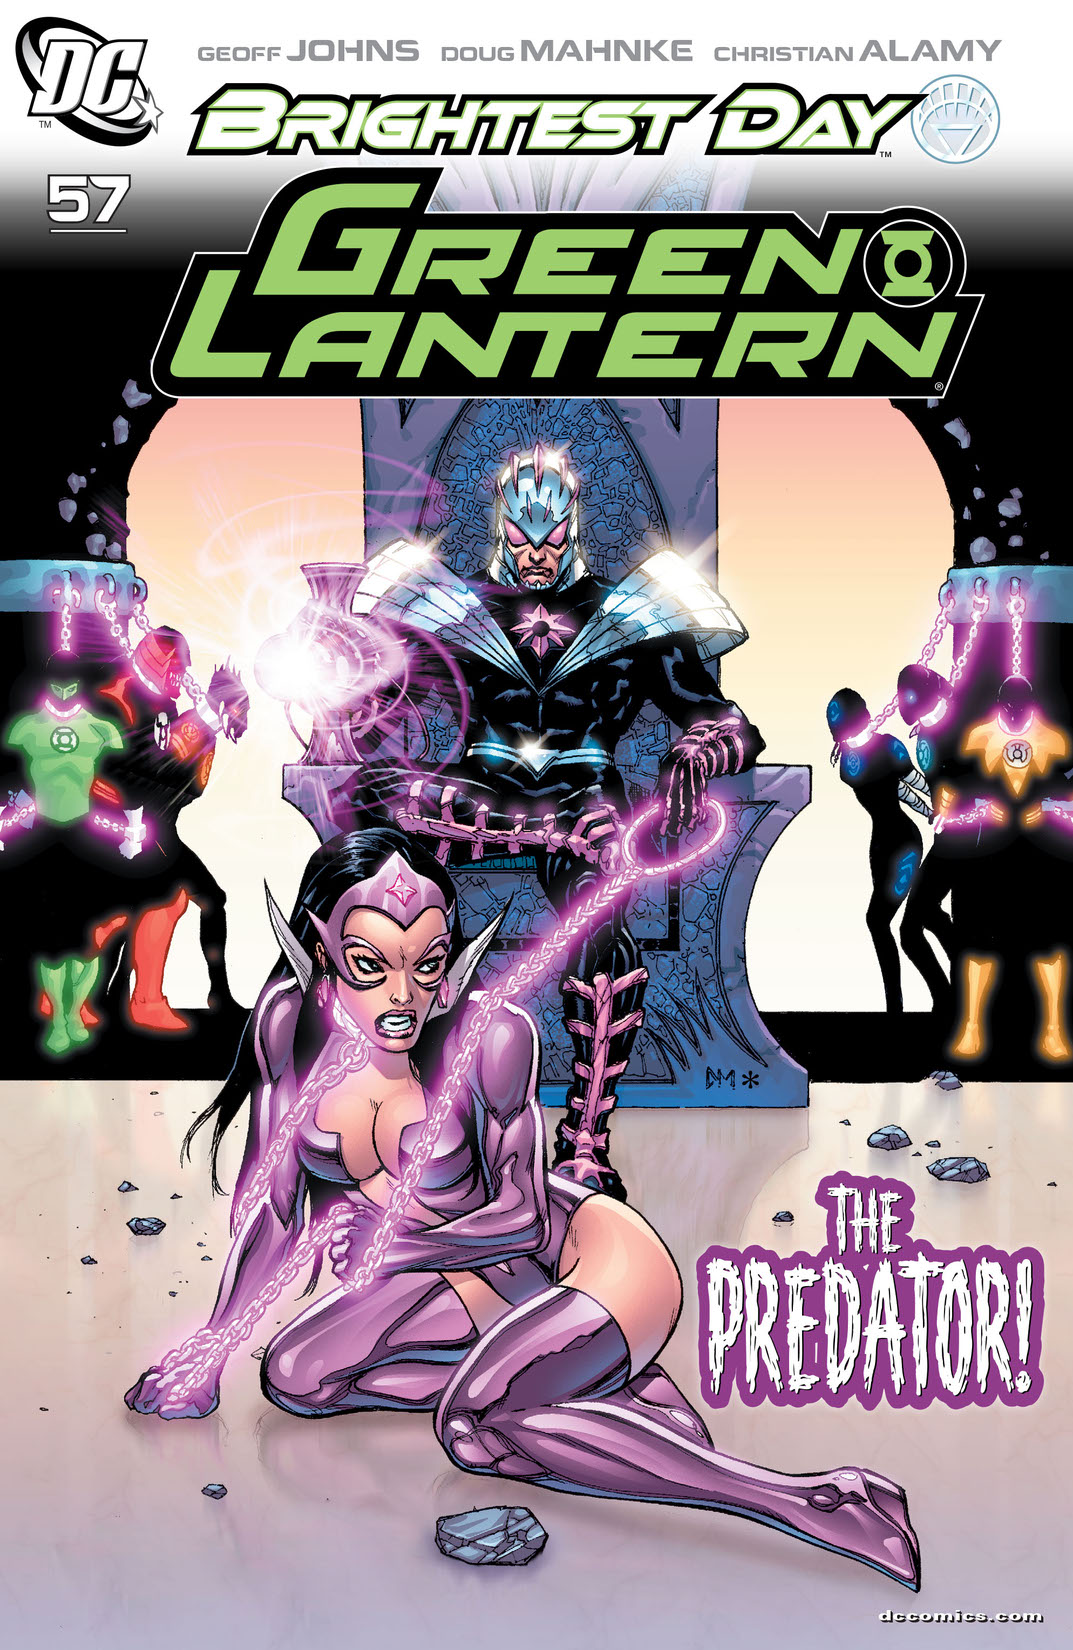 Green Lantern (2005-) #57 preview images